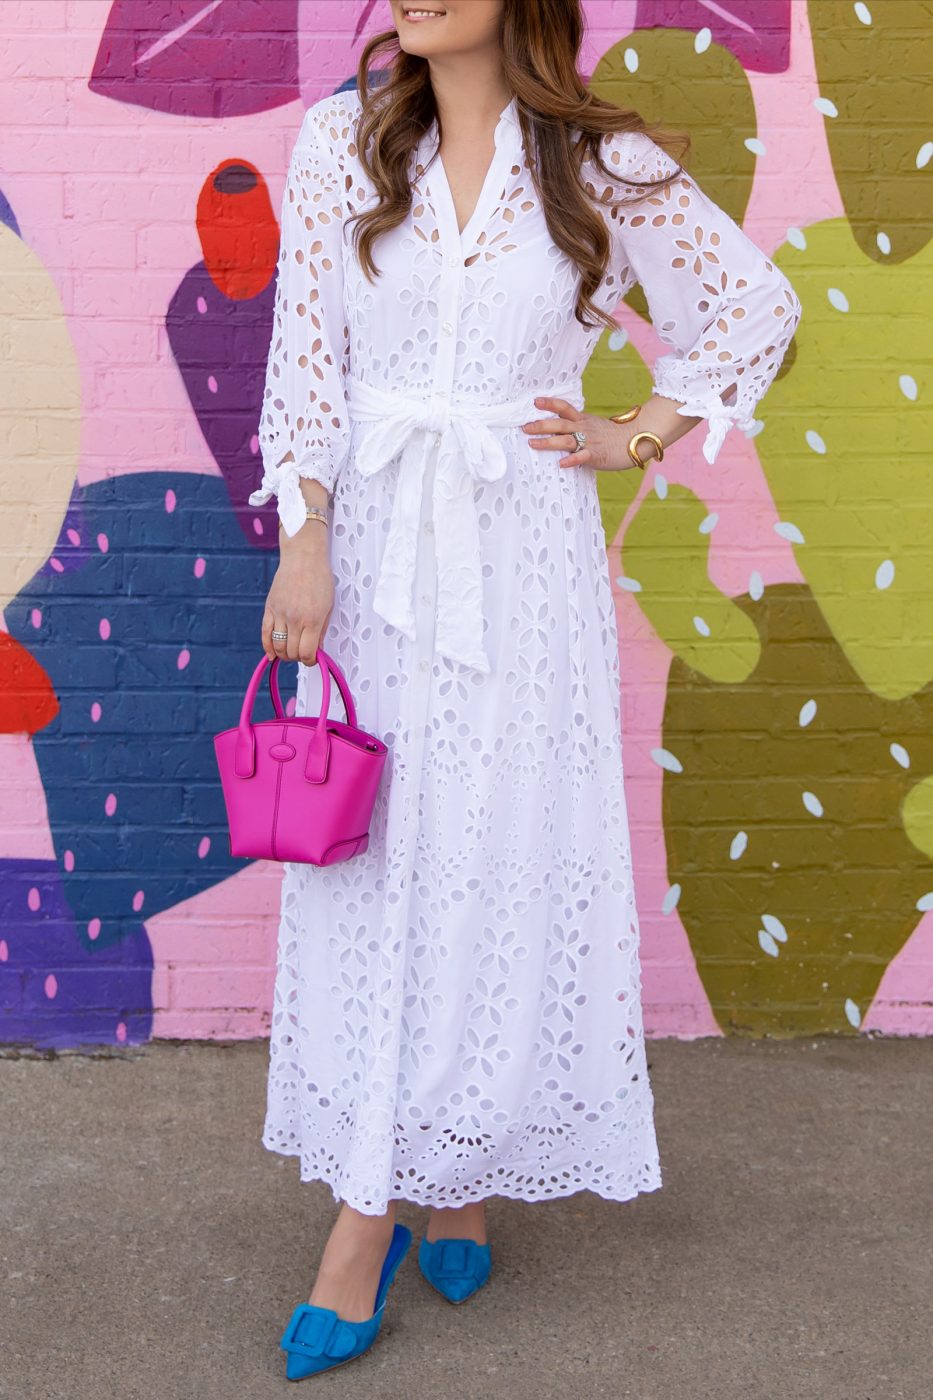 My Go-To Lilly Pulitzer White Eyelet Dress for Spring - Style Charade